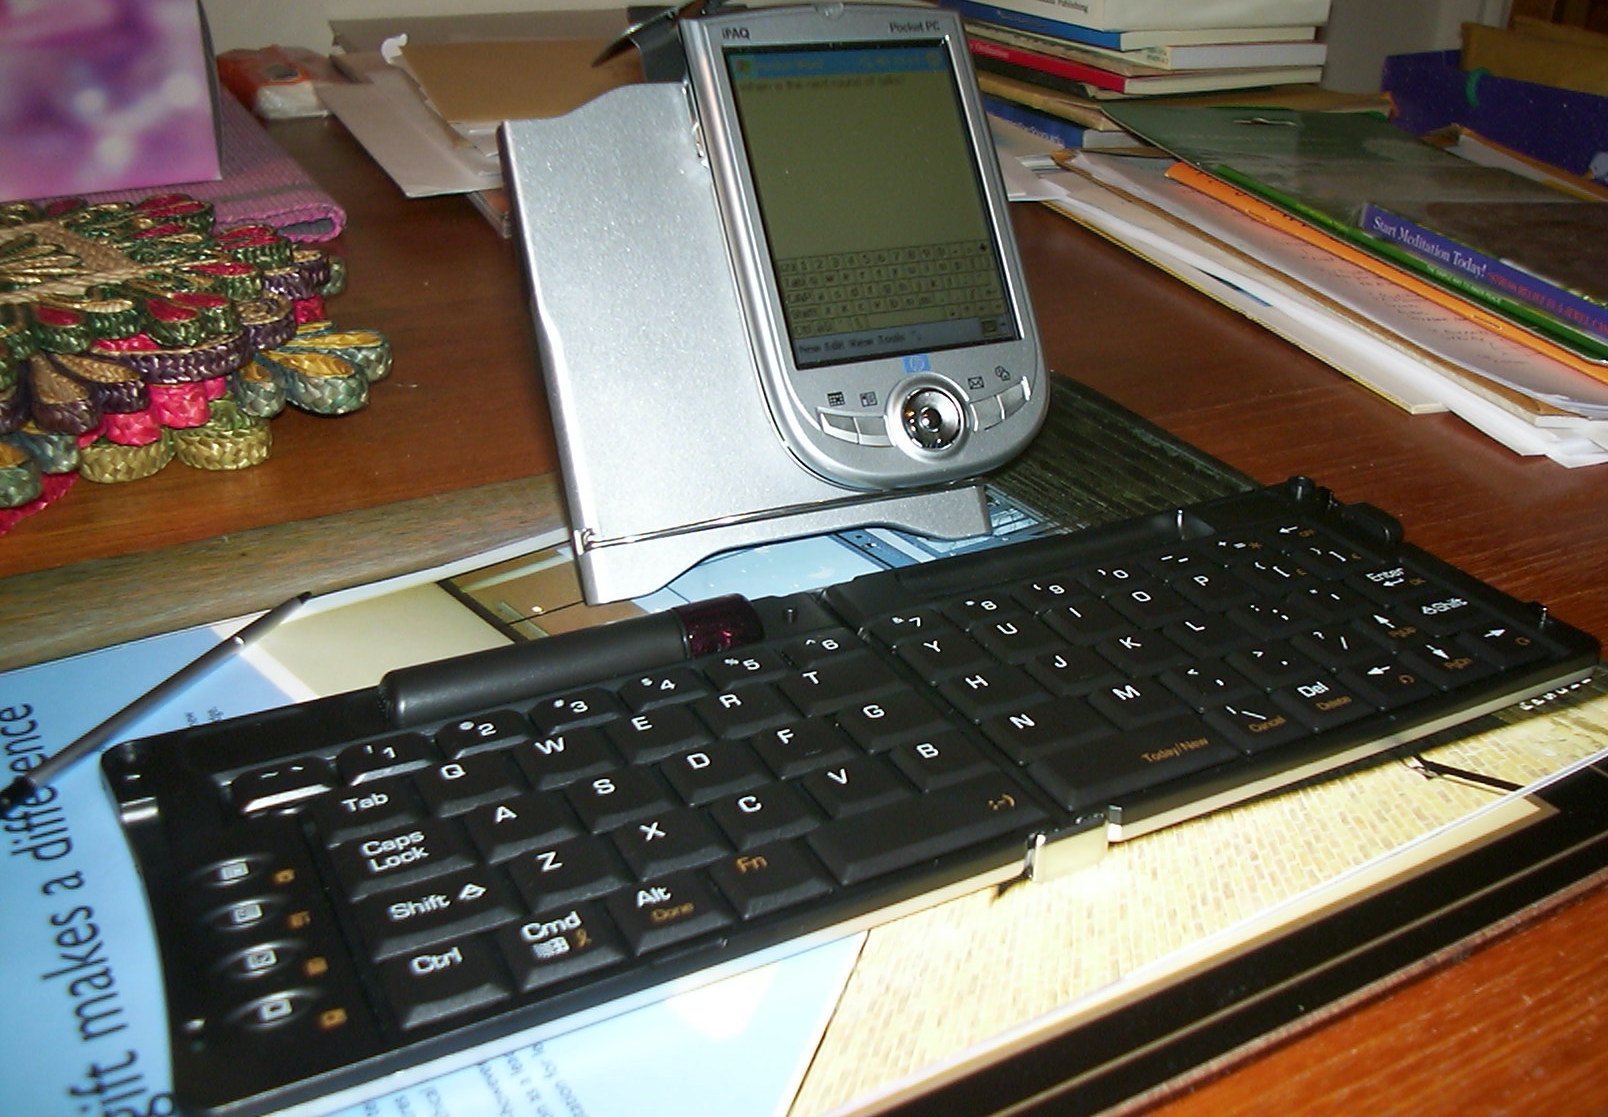 Photograph shows the iPaq PDA on a stand and Belkin stowaway keyboard unfolded on a desk at home